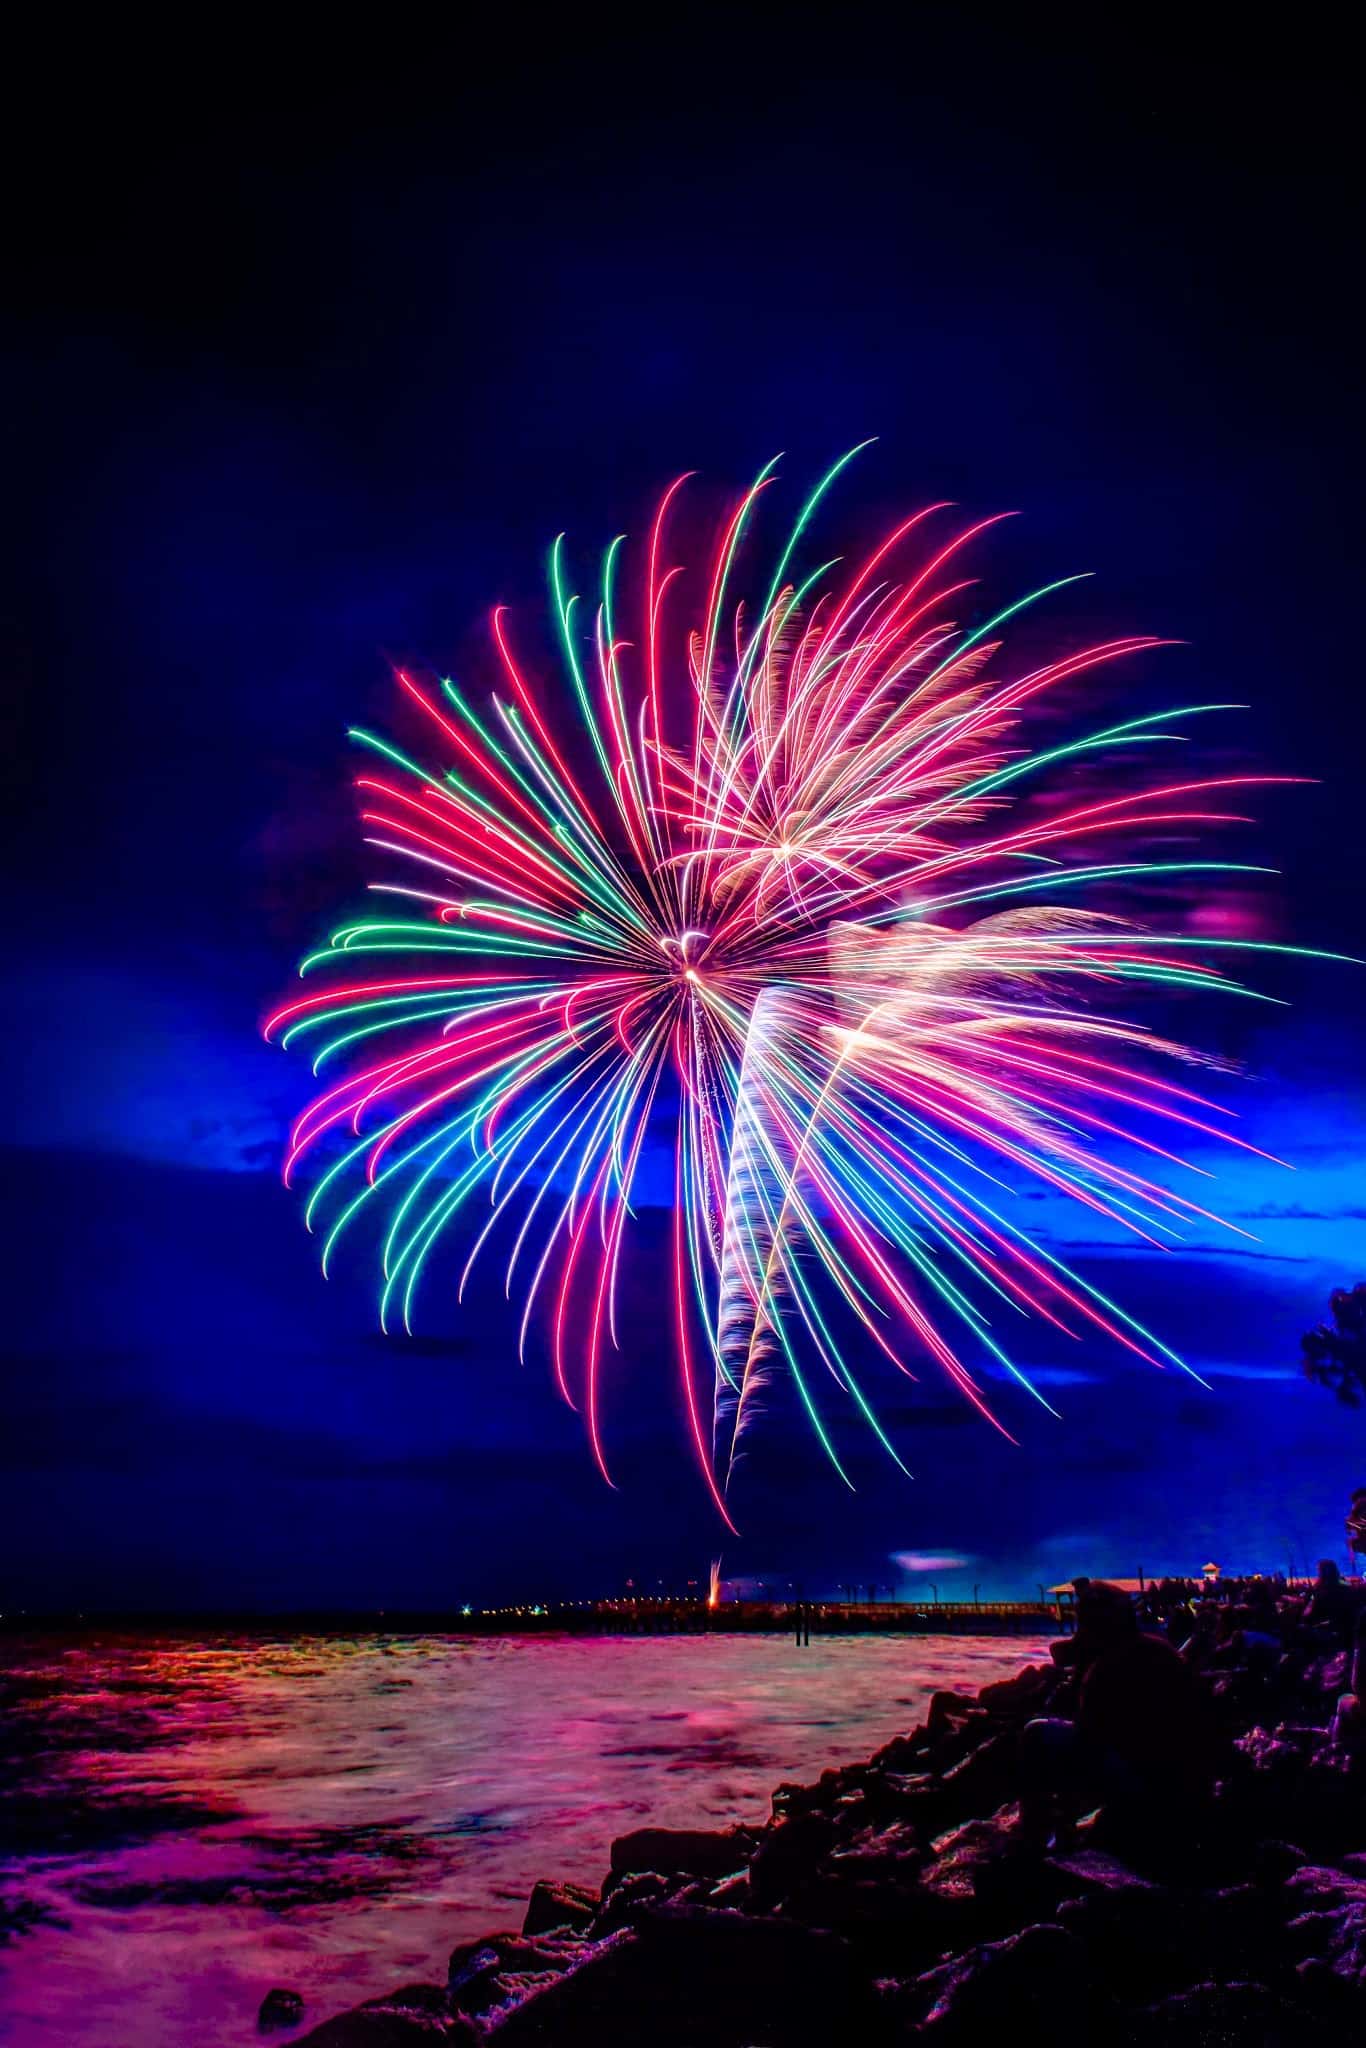 How to photograph fireworks: Simple tips and tricks for anyone